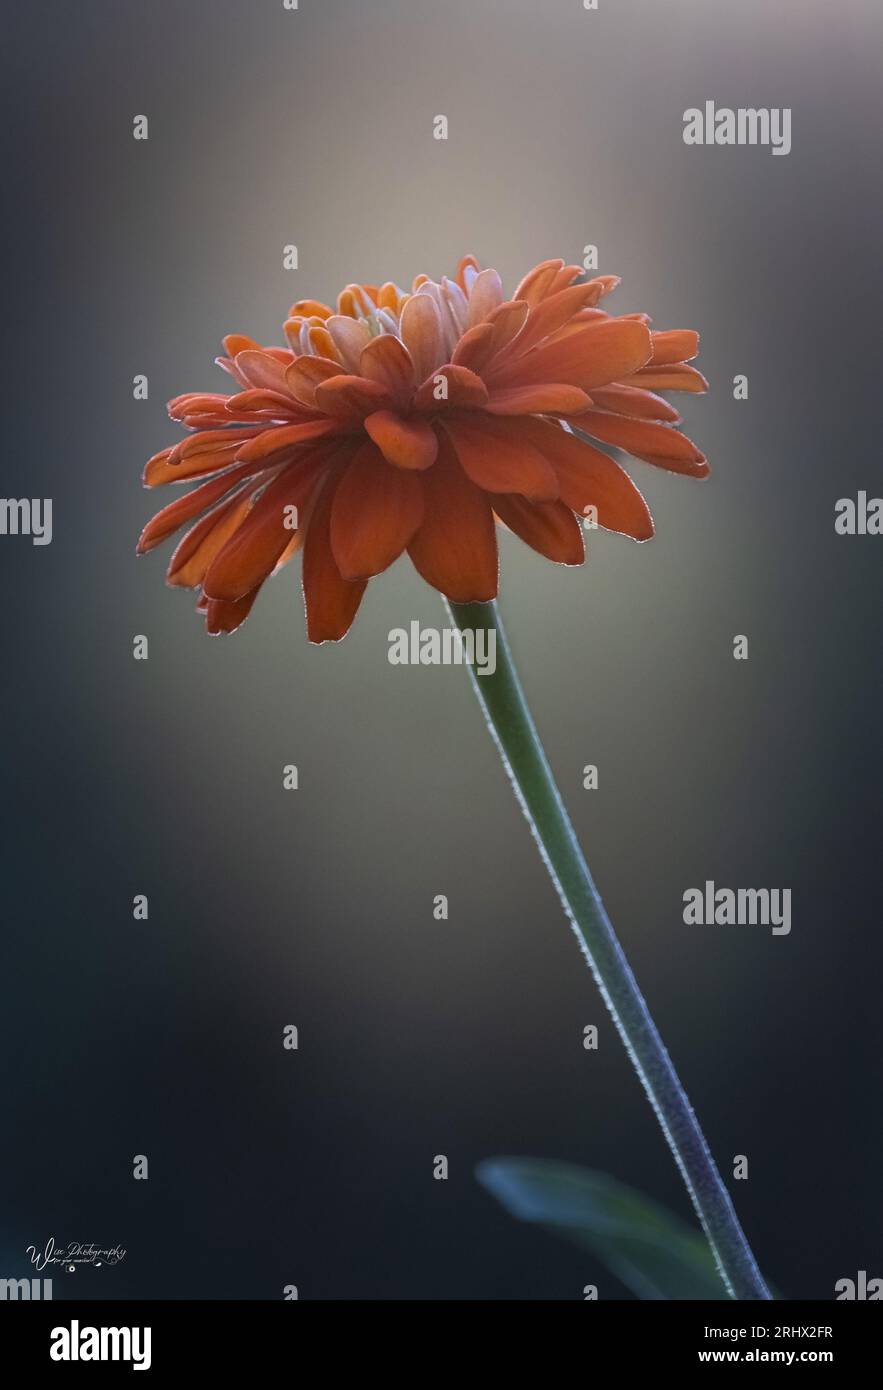 A solitary orange Zinnia blossom profile on a green stem with a neutral dark background and a halo of background light in summer or fall, Pennsylvania Stock Photo